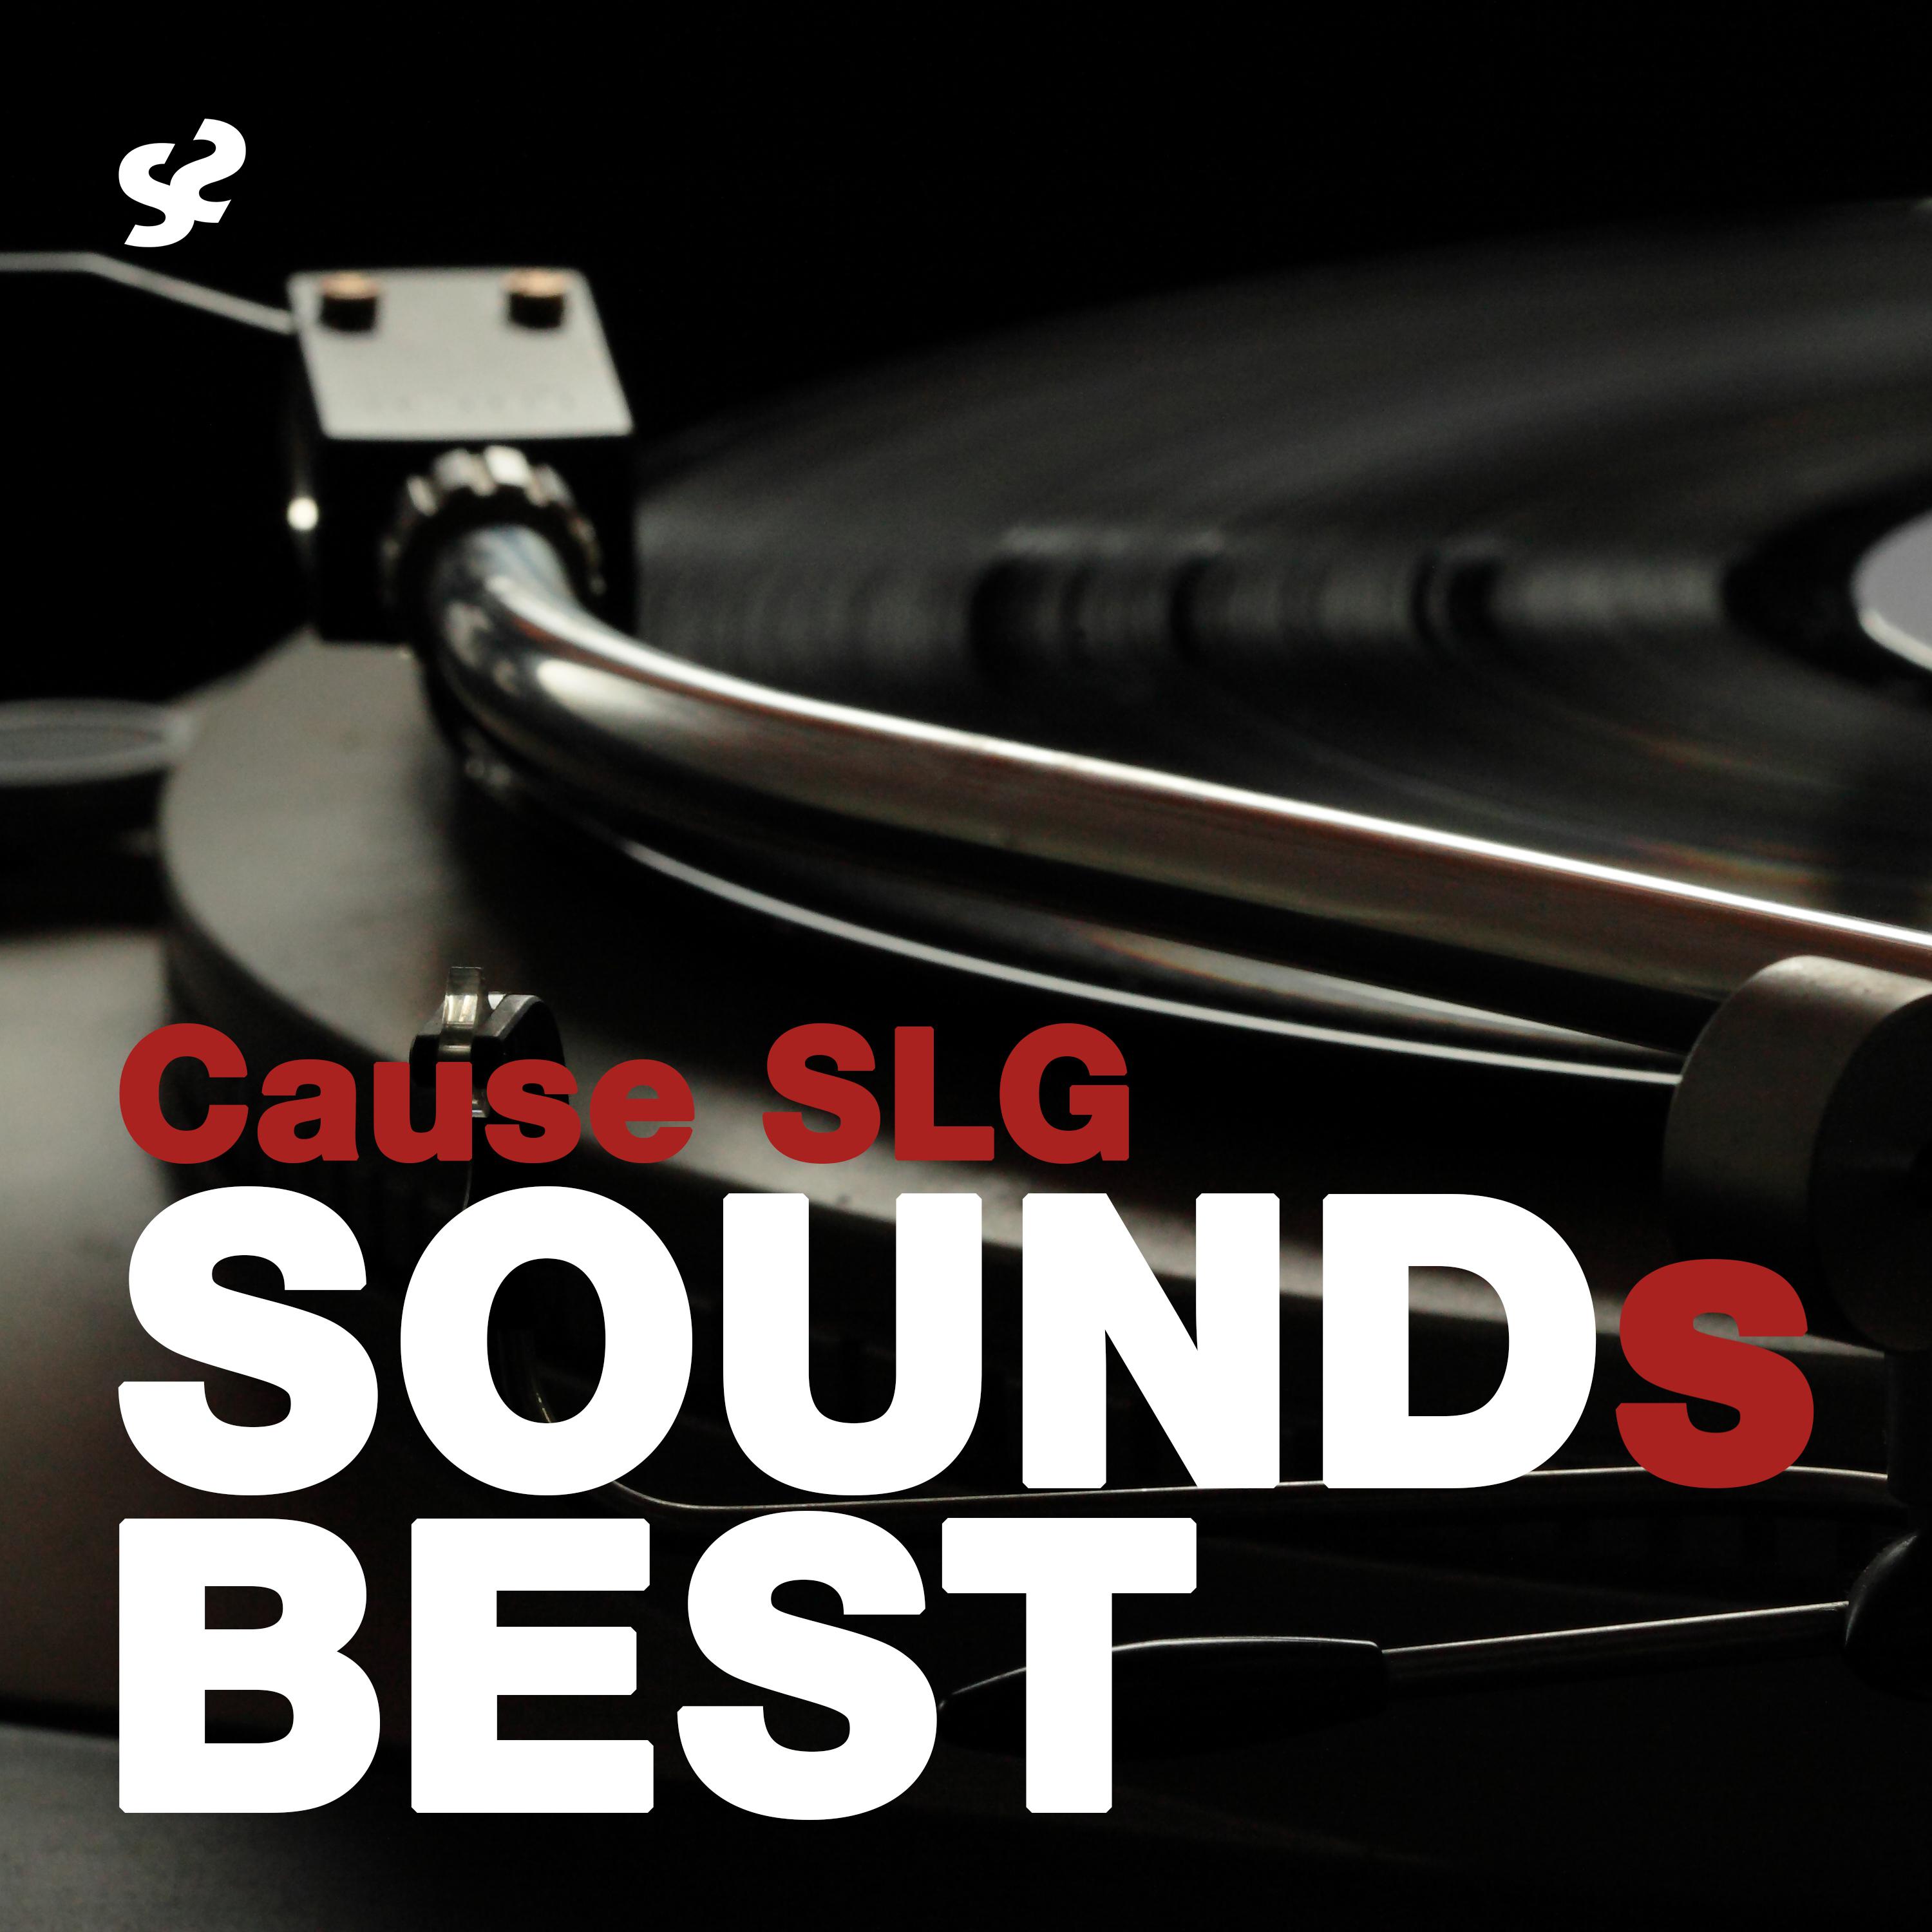 Cause SLG SOUNDs BEST